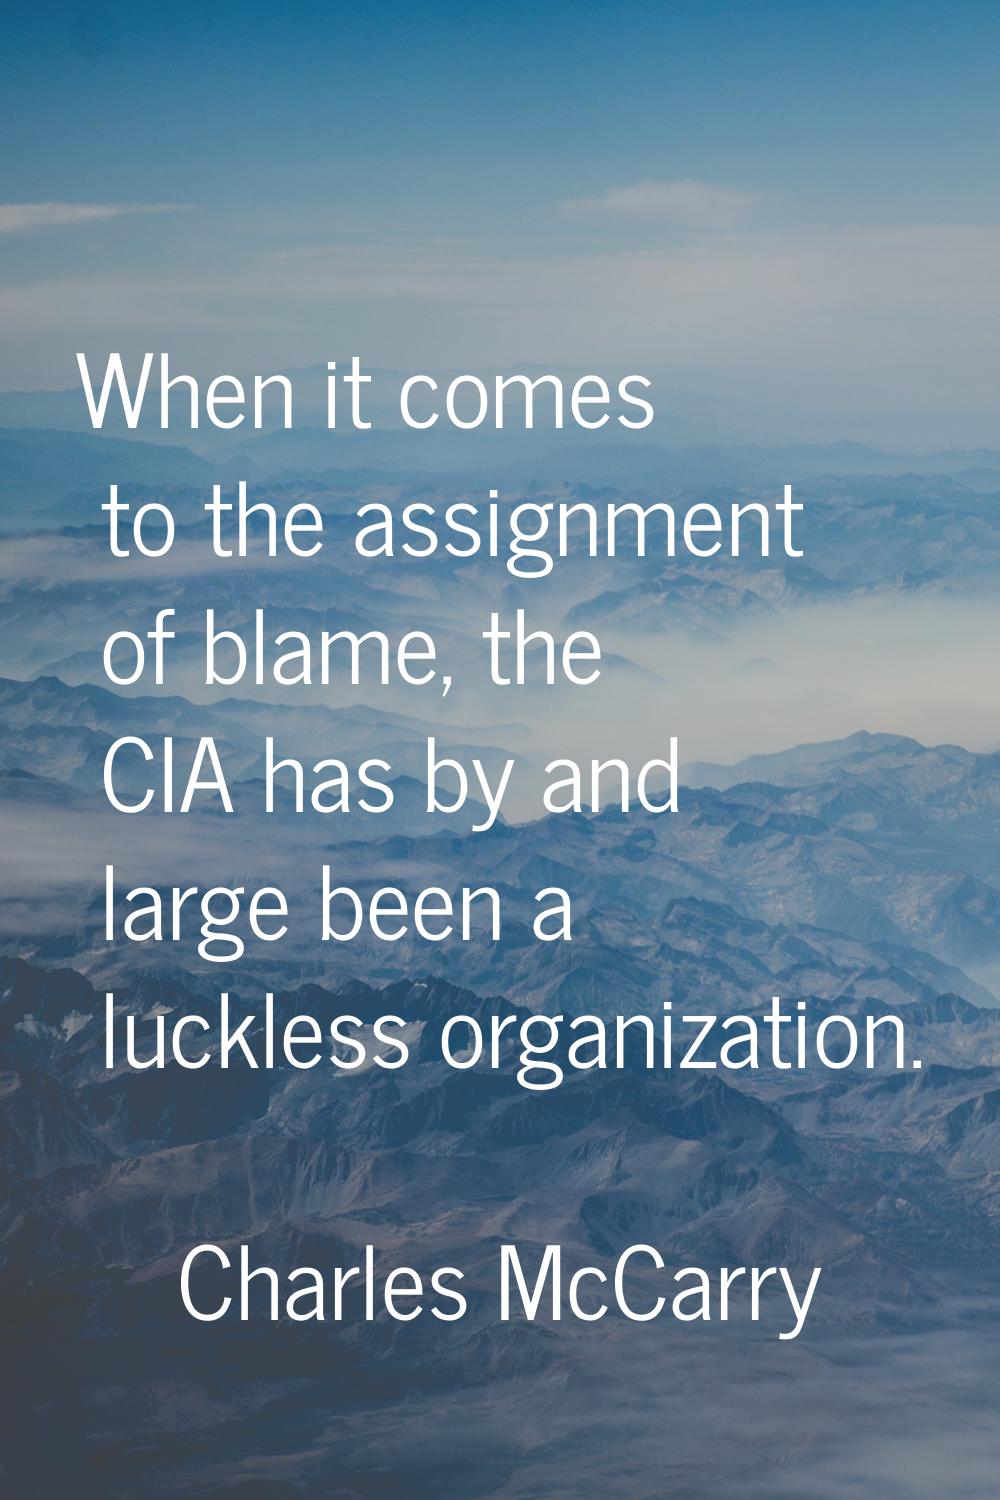 When it comes to the assignment of blame, the CIA has by and large been a luckless organization.